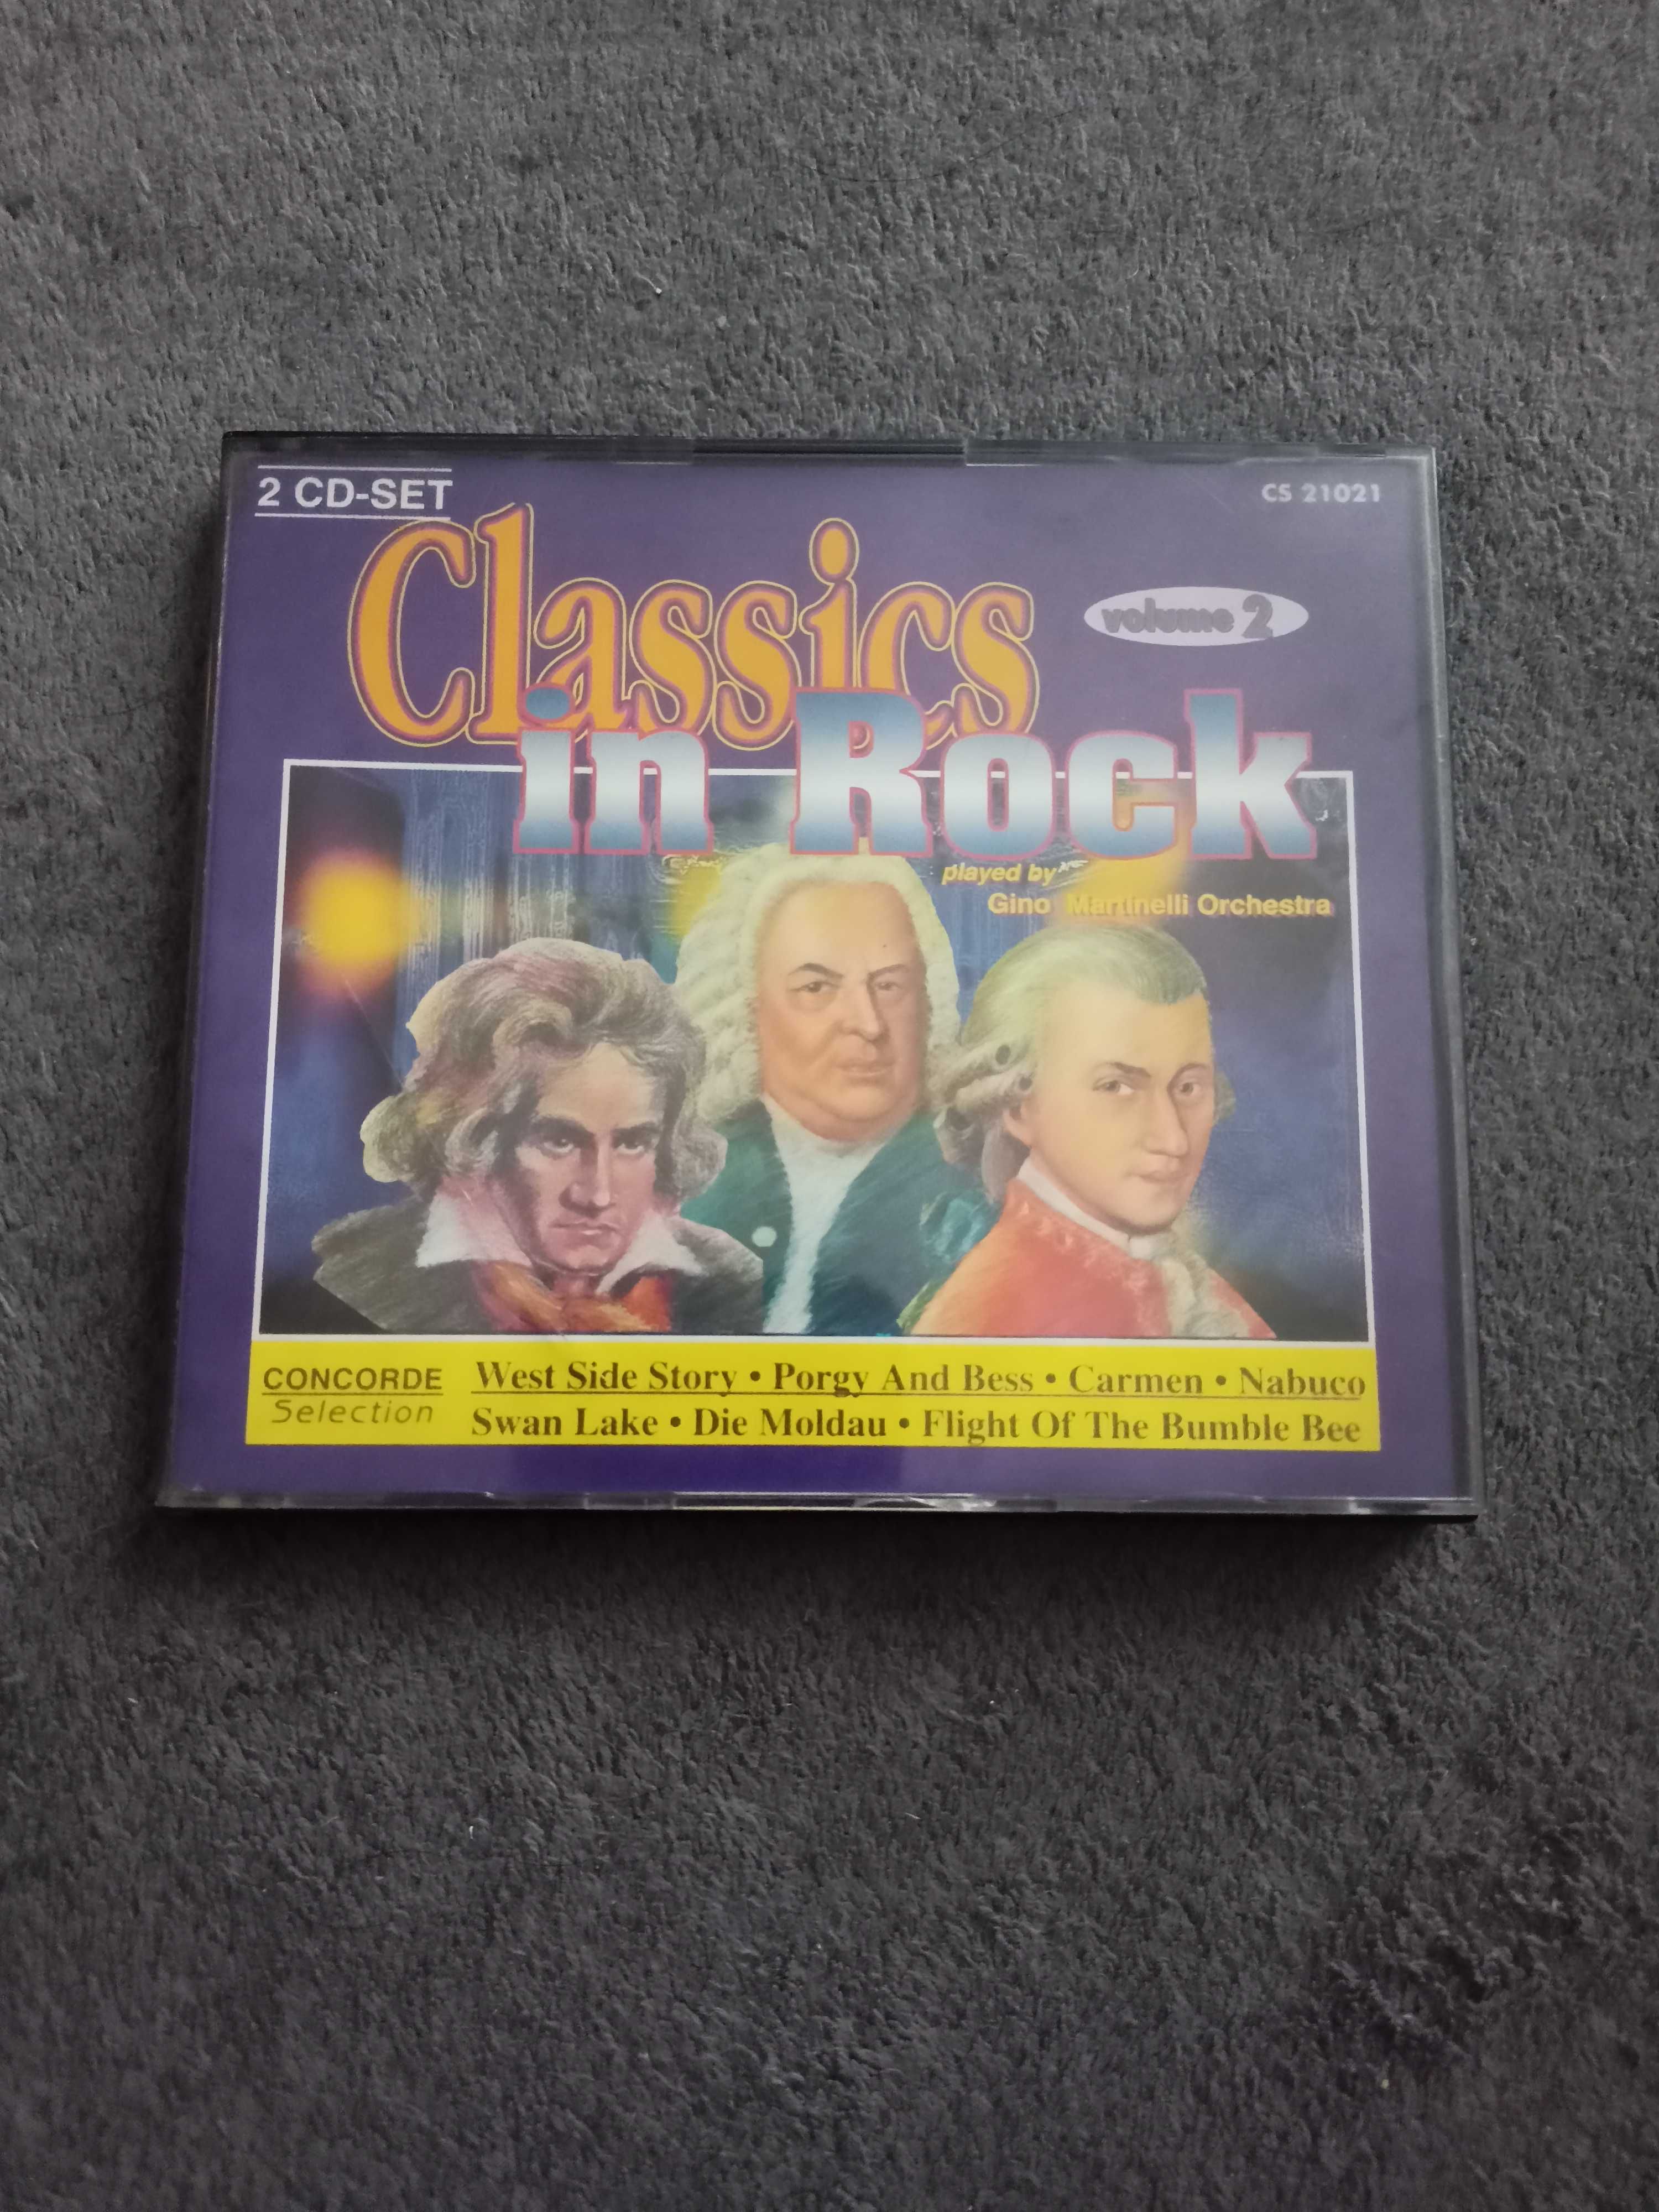 Classics in rock, 2 cd, played by Gino Martinelli Orchestra